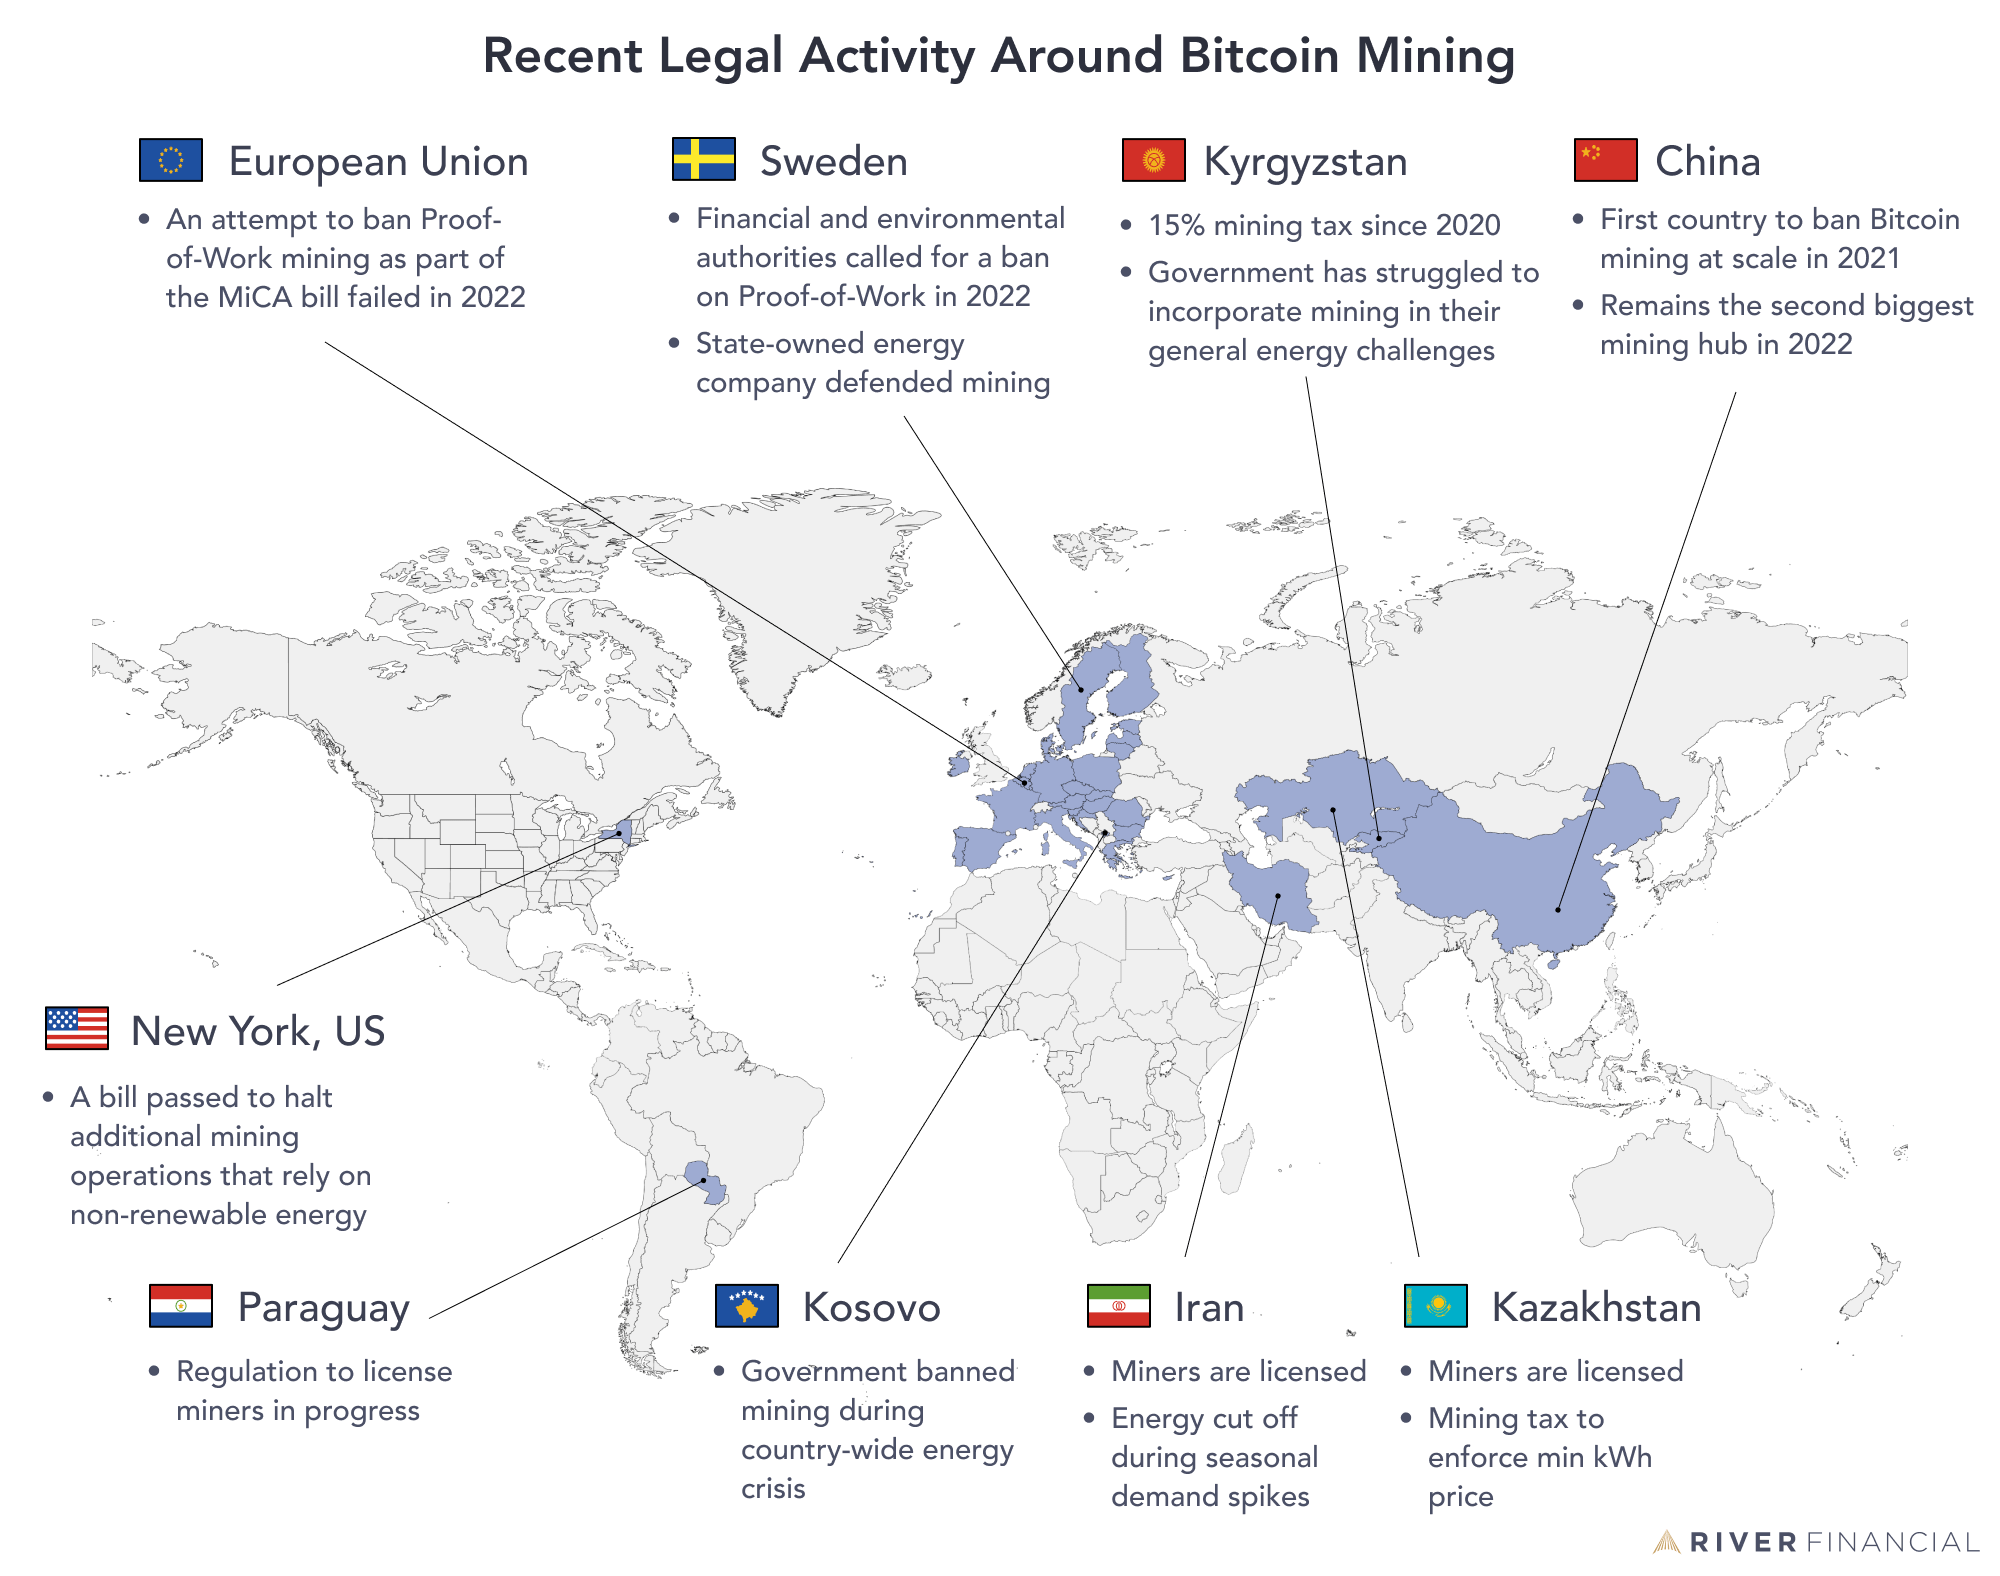 A global map of recent legal activity around Bitcoin mining